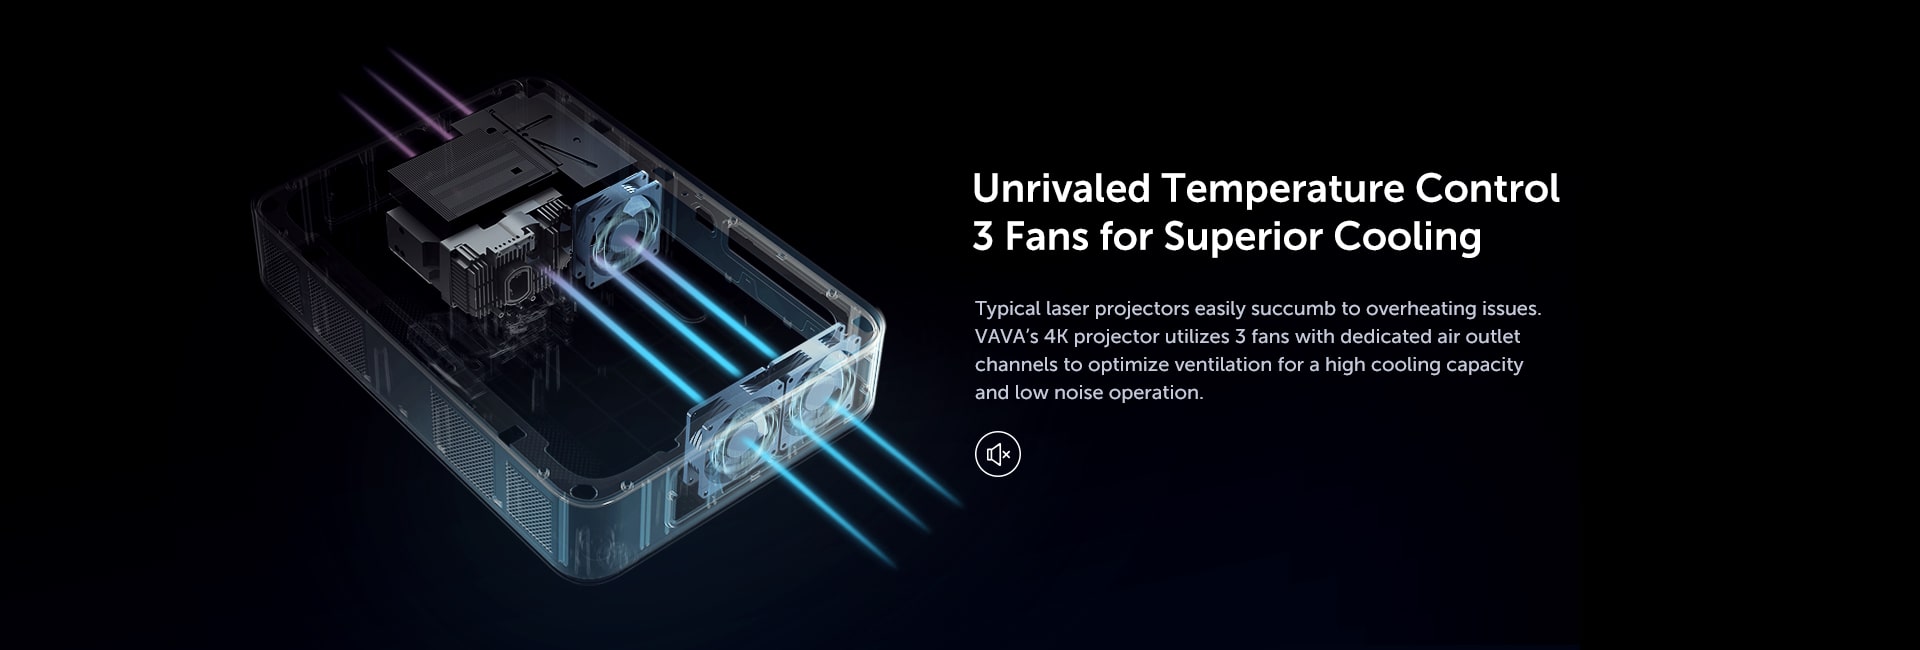 Unrivaled temperature control 3 fans for superior cooling